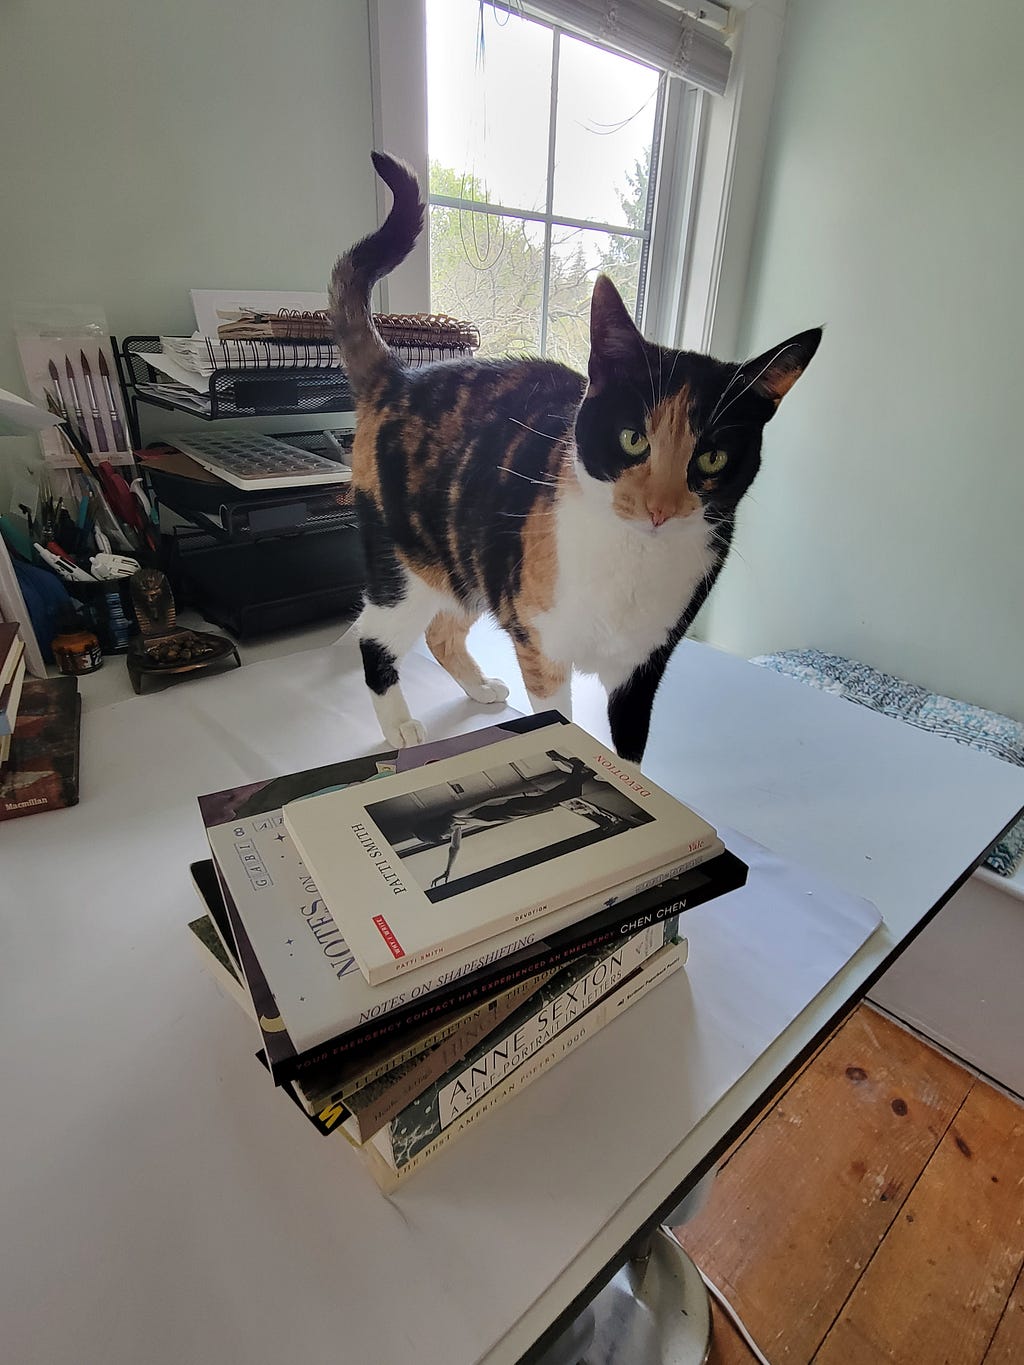 A tuxedo tortoise cat is about to scent-mark a stack of poetry and craft books atop a desk. Patti Smith’s ‘Devotions’ book cover is visible on the top of the stack.